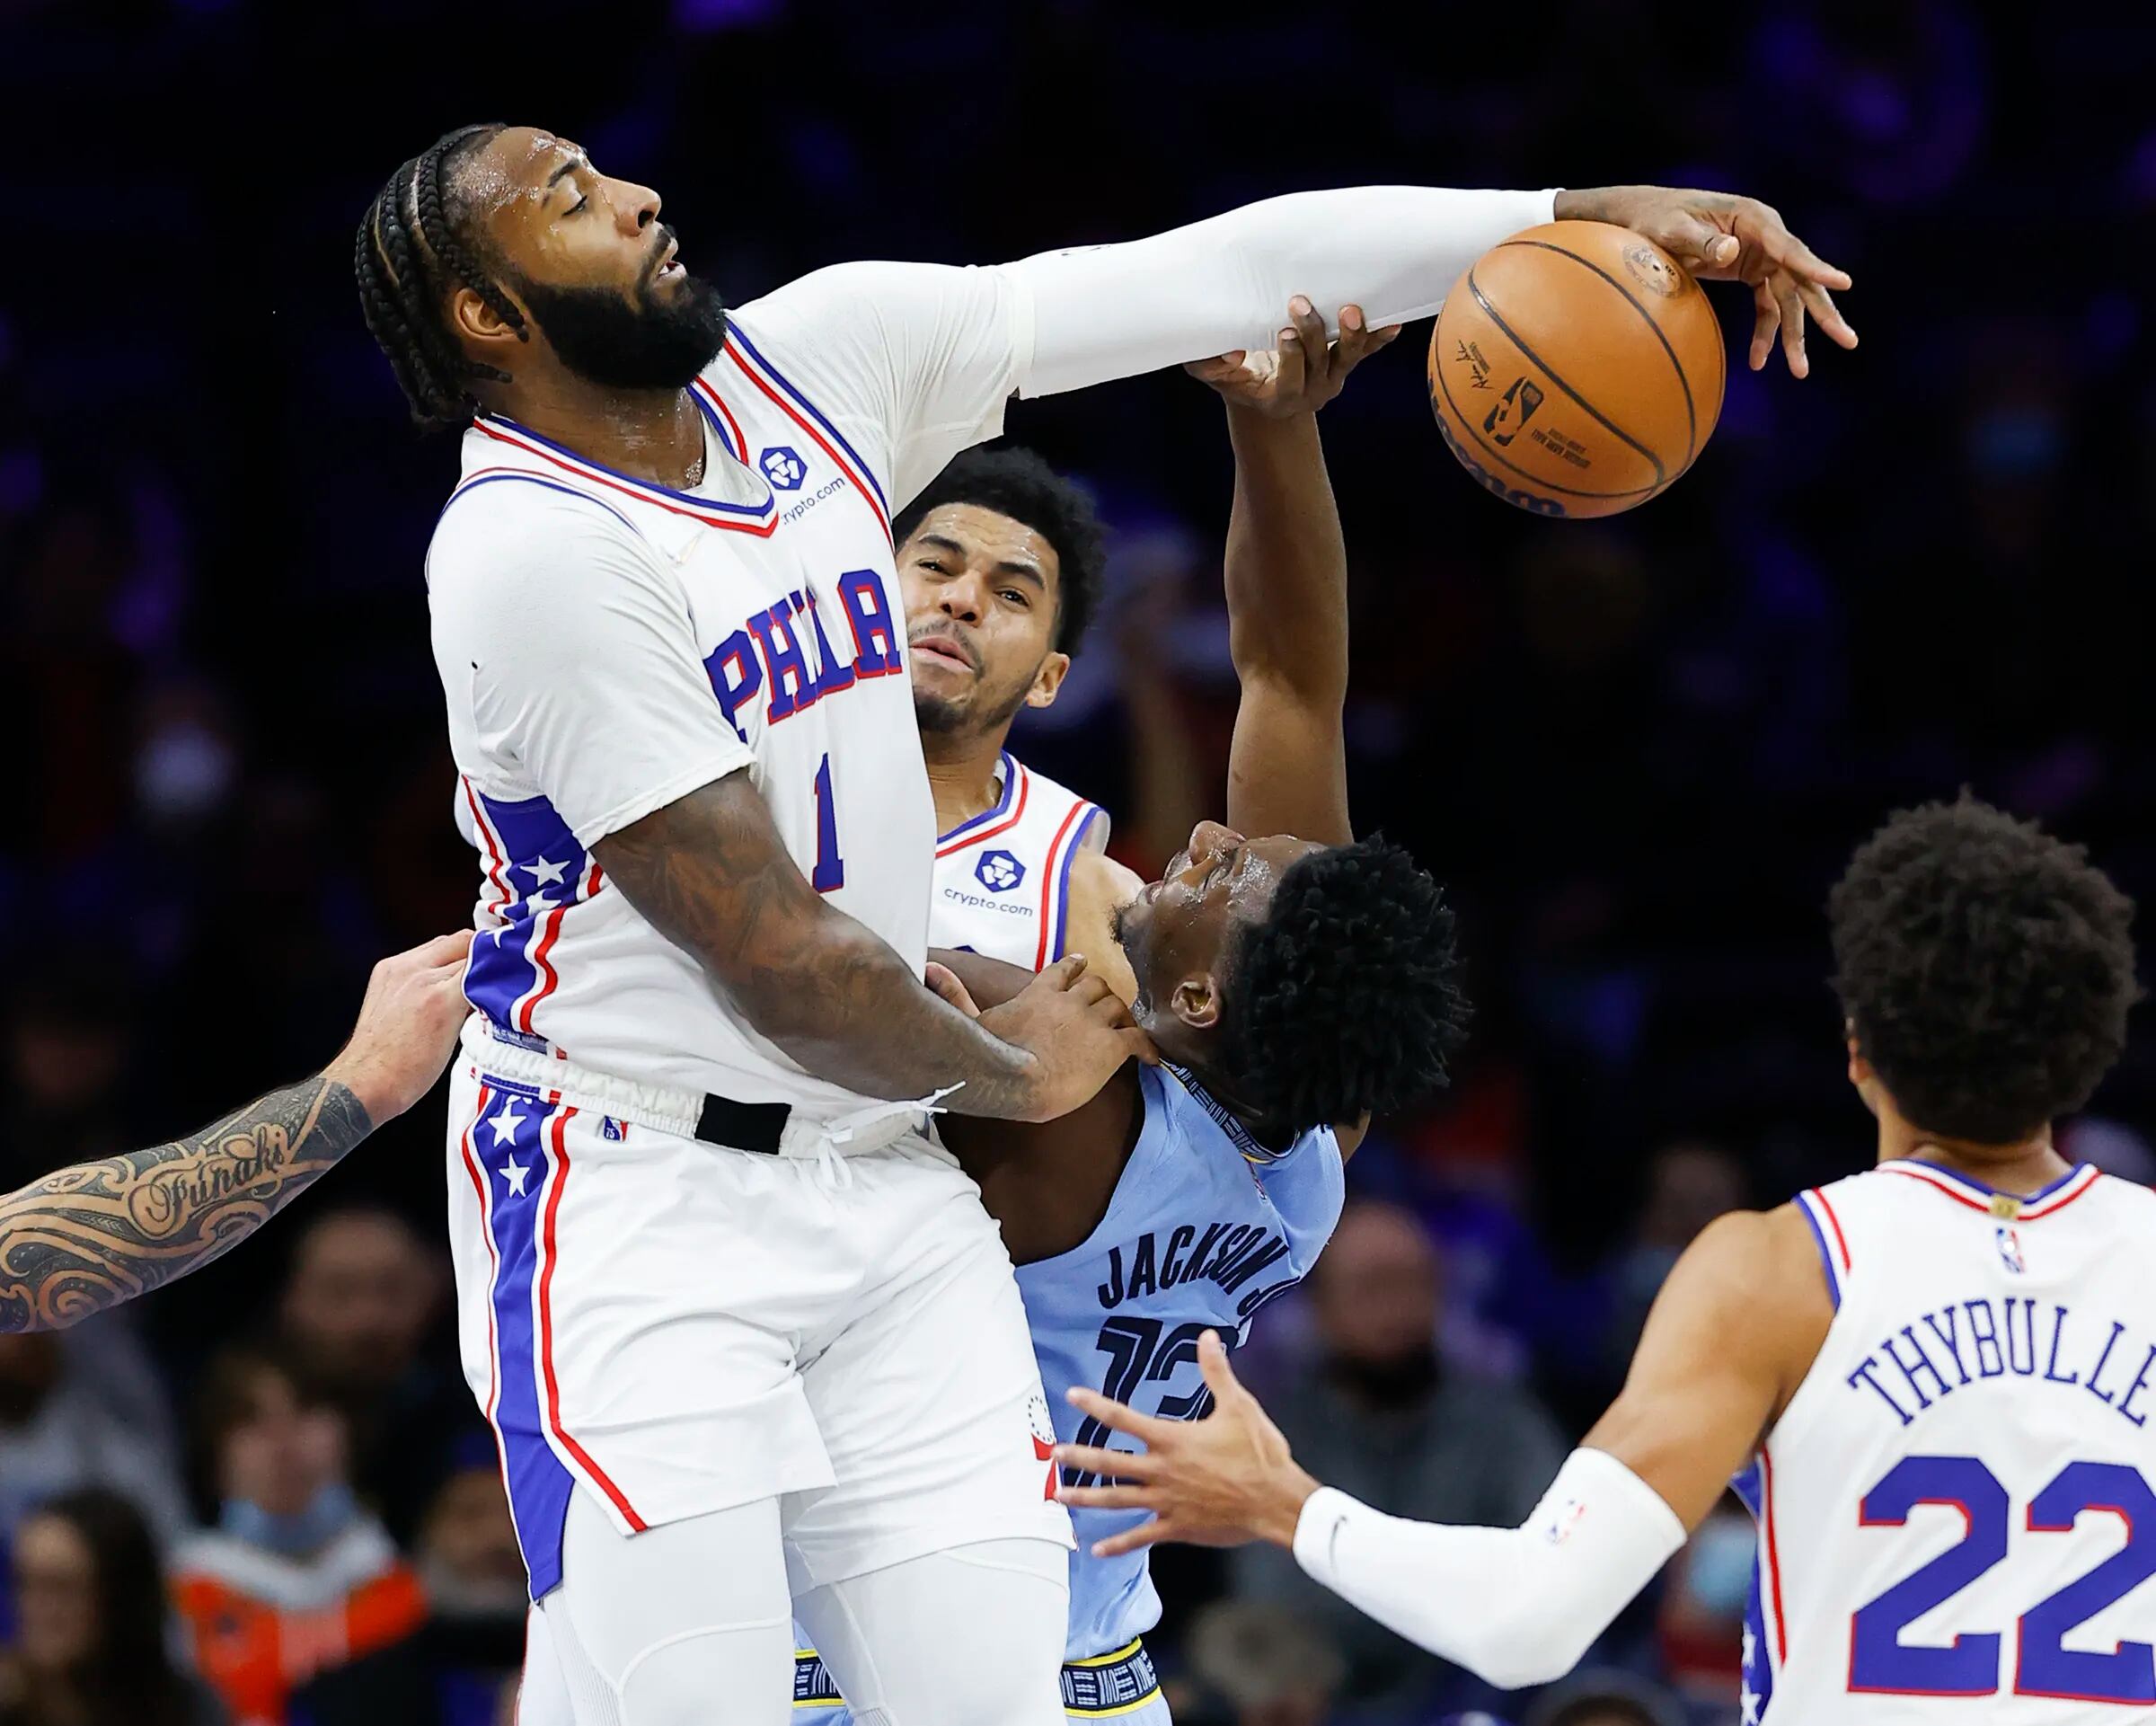 Sixers earn a thrilling 122-119 overtime victory over Ja Morant-led  Grizzlies, even without Joel Embiid